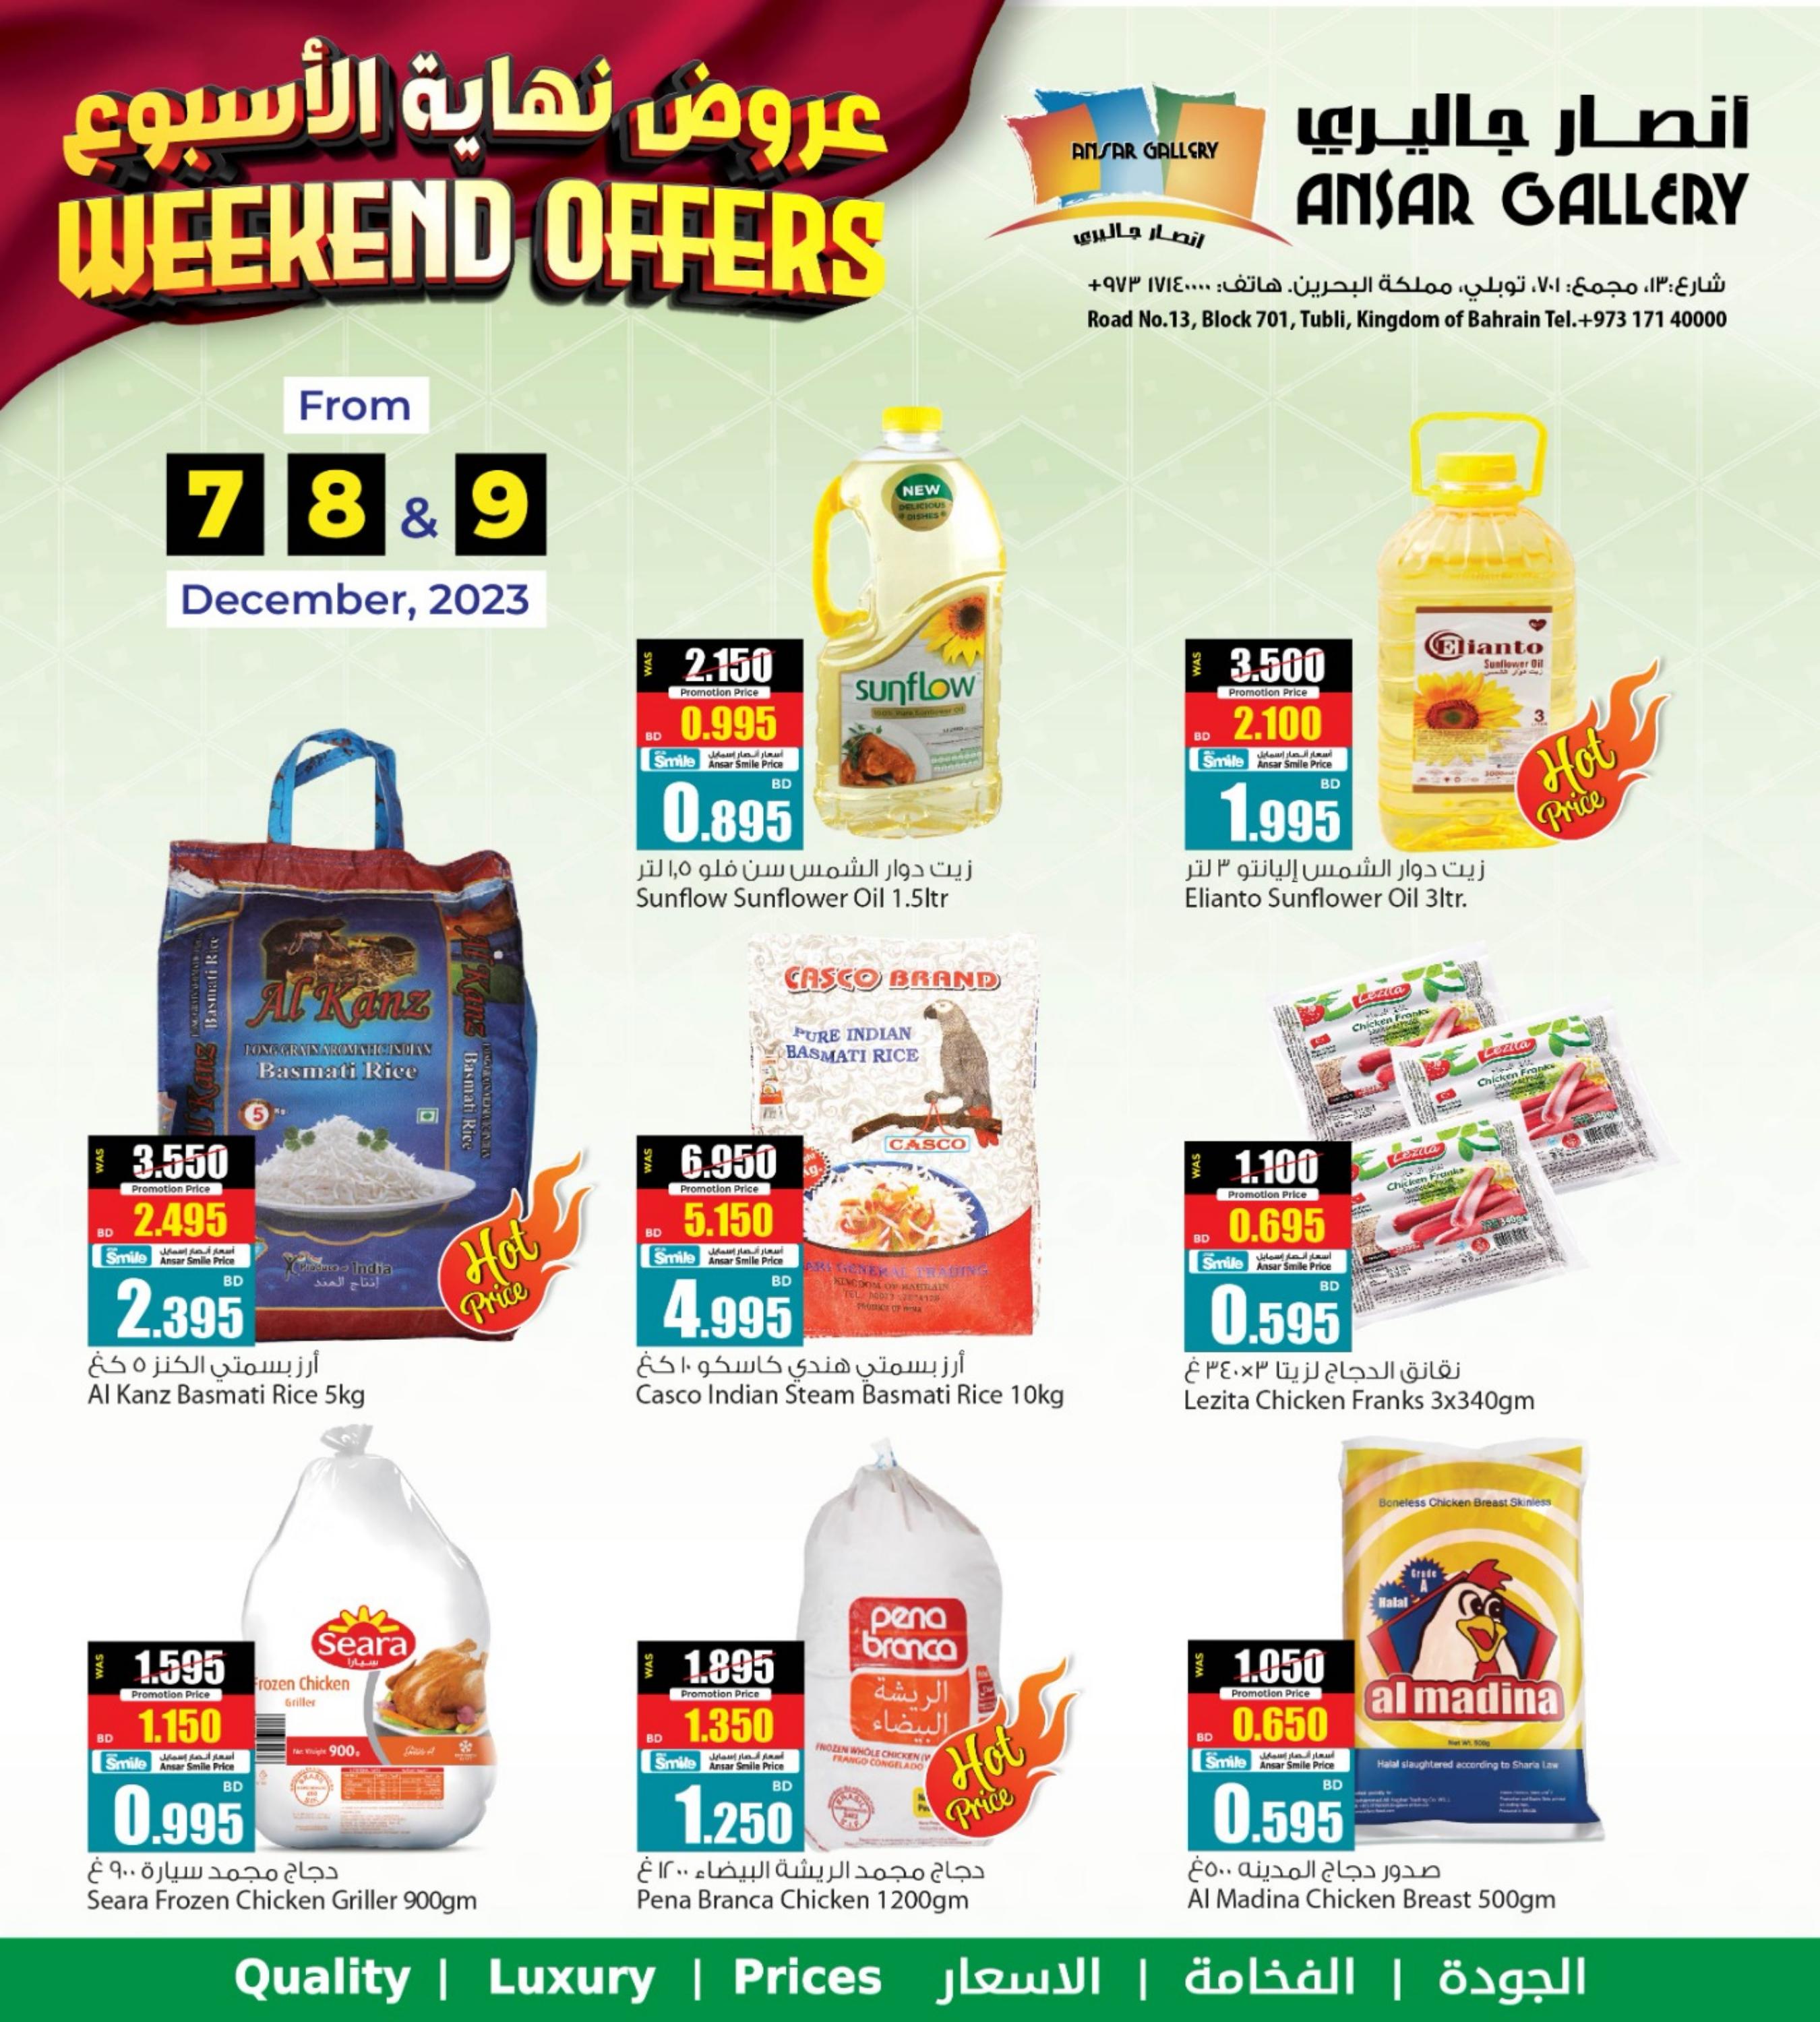 Page 2 at Weekend offers at Ansar Gallery Bahrain